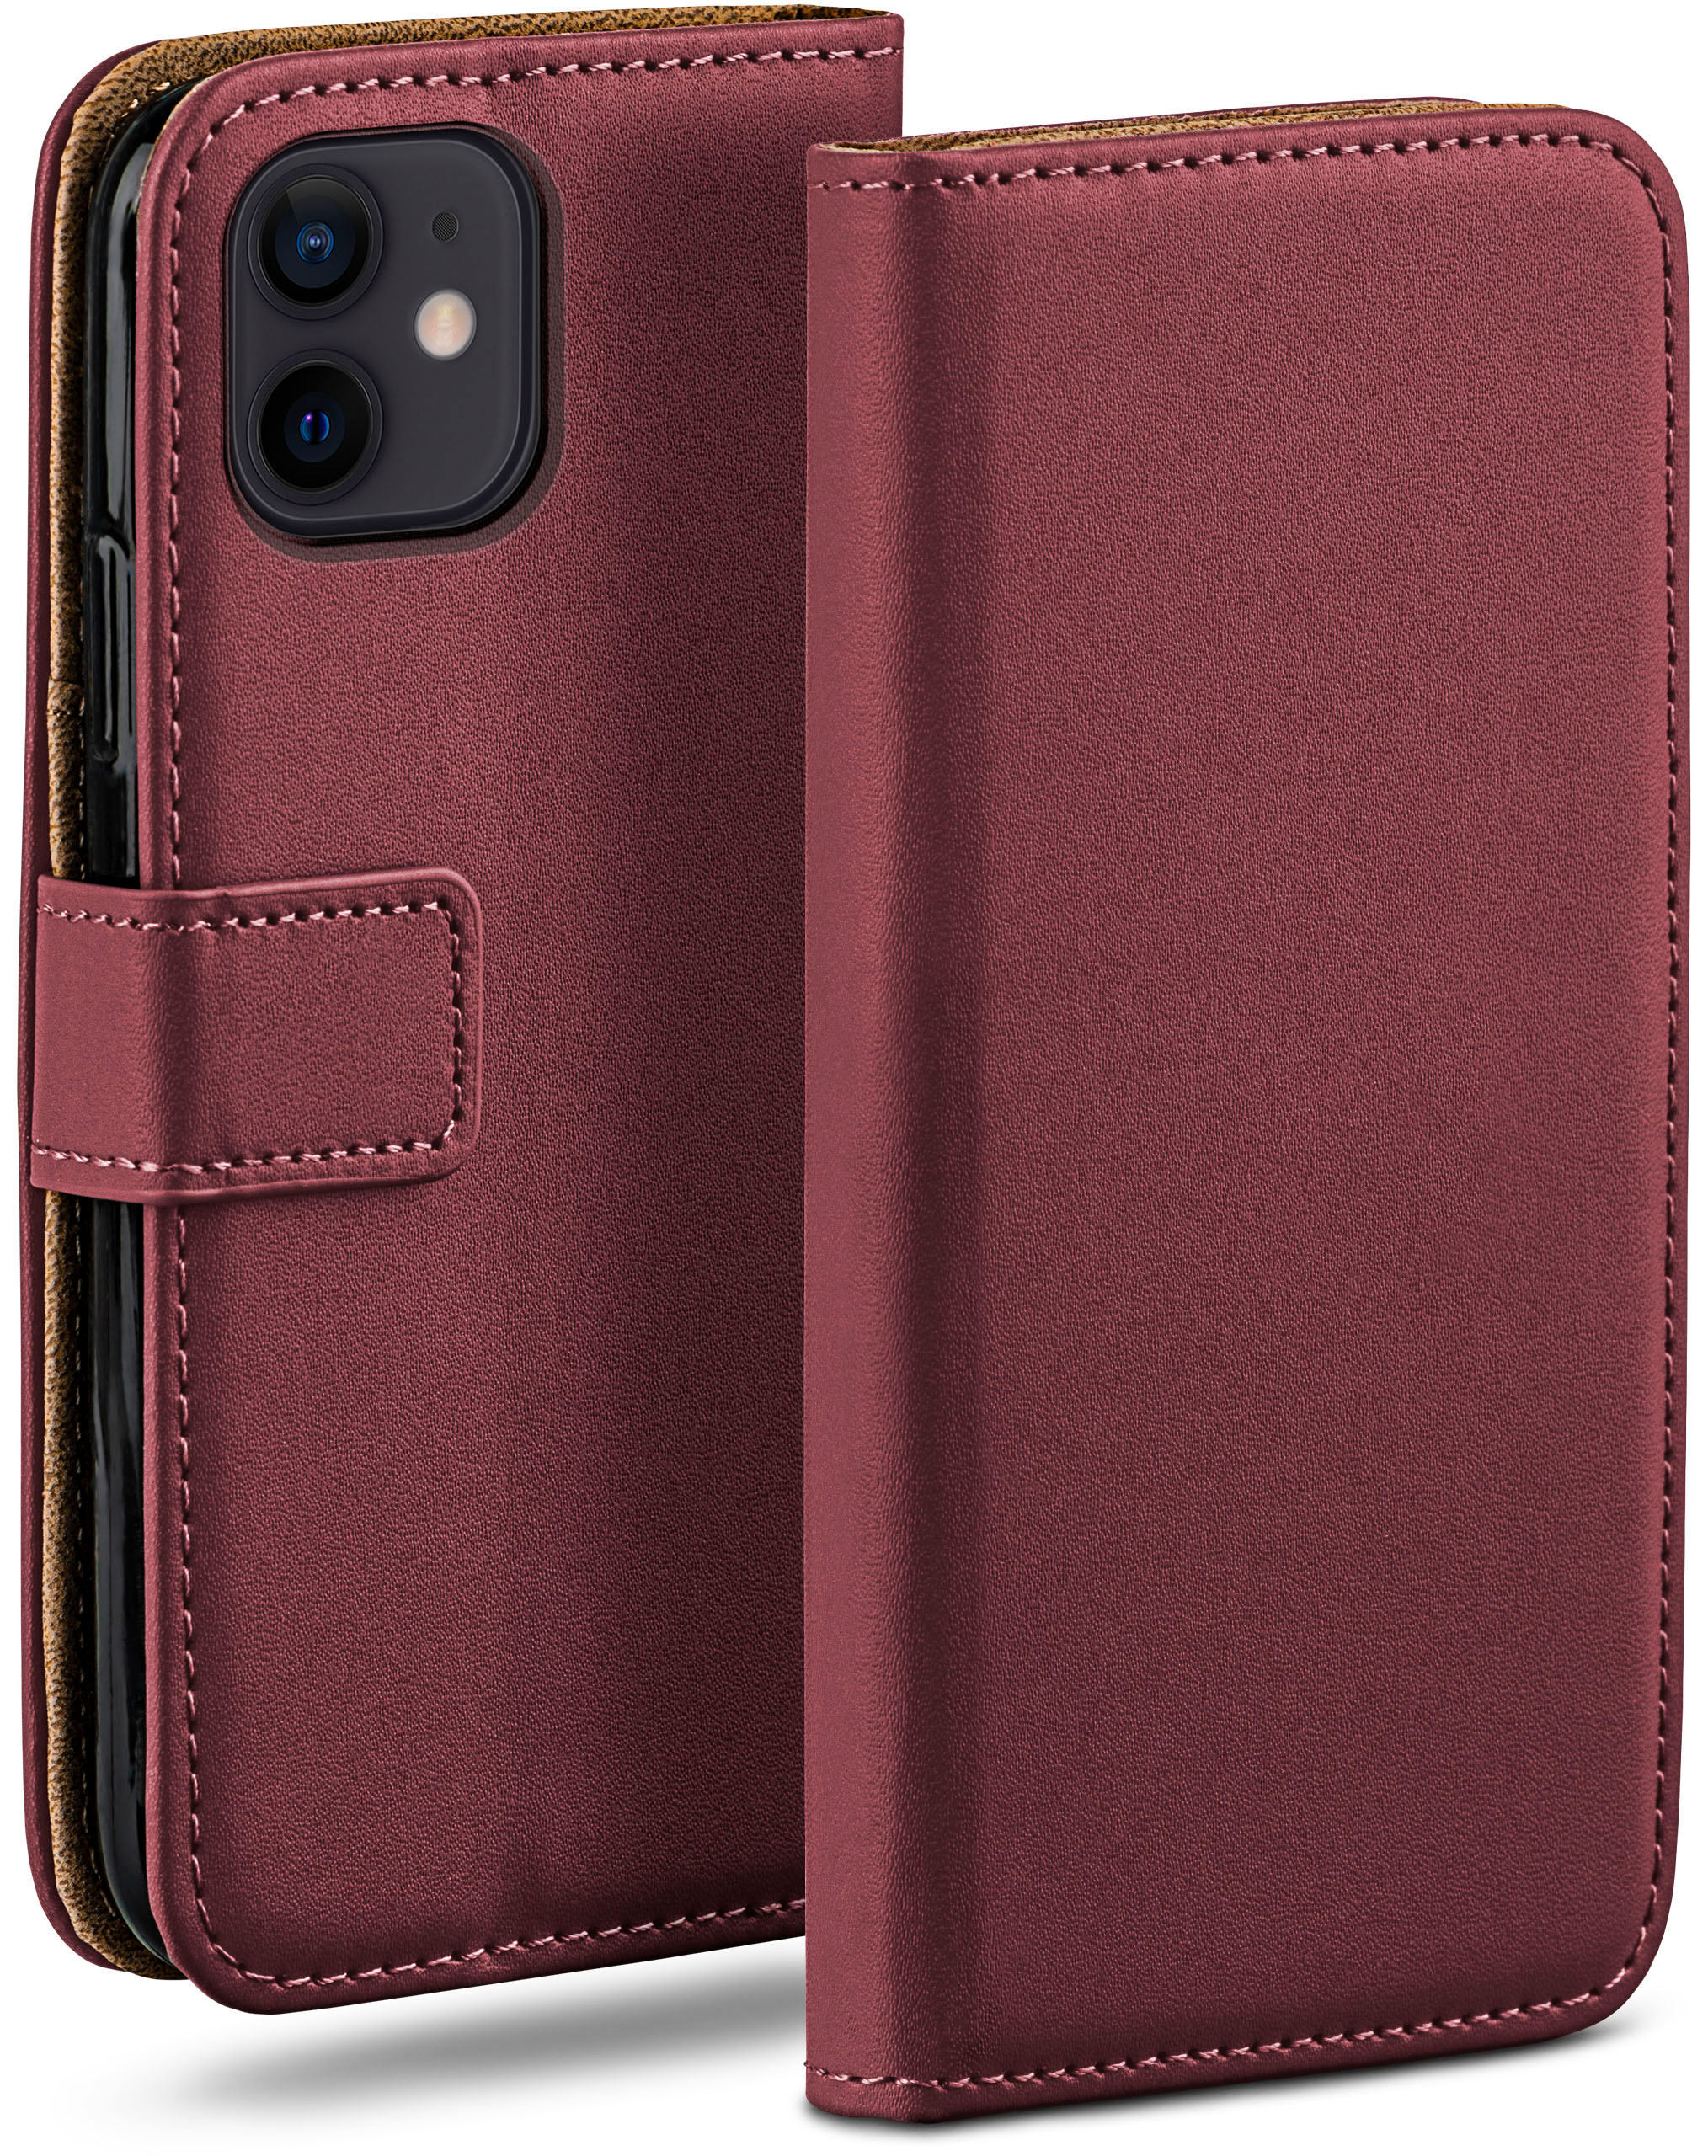 MOEX Book mini, Apple, Maroon-Red 12 iPhone Bookcover, Case,